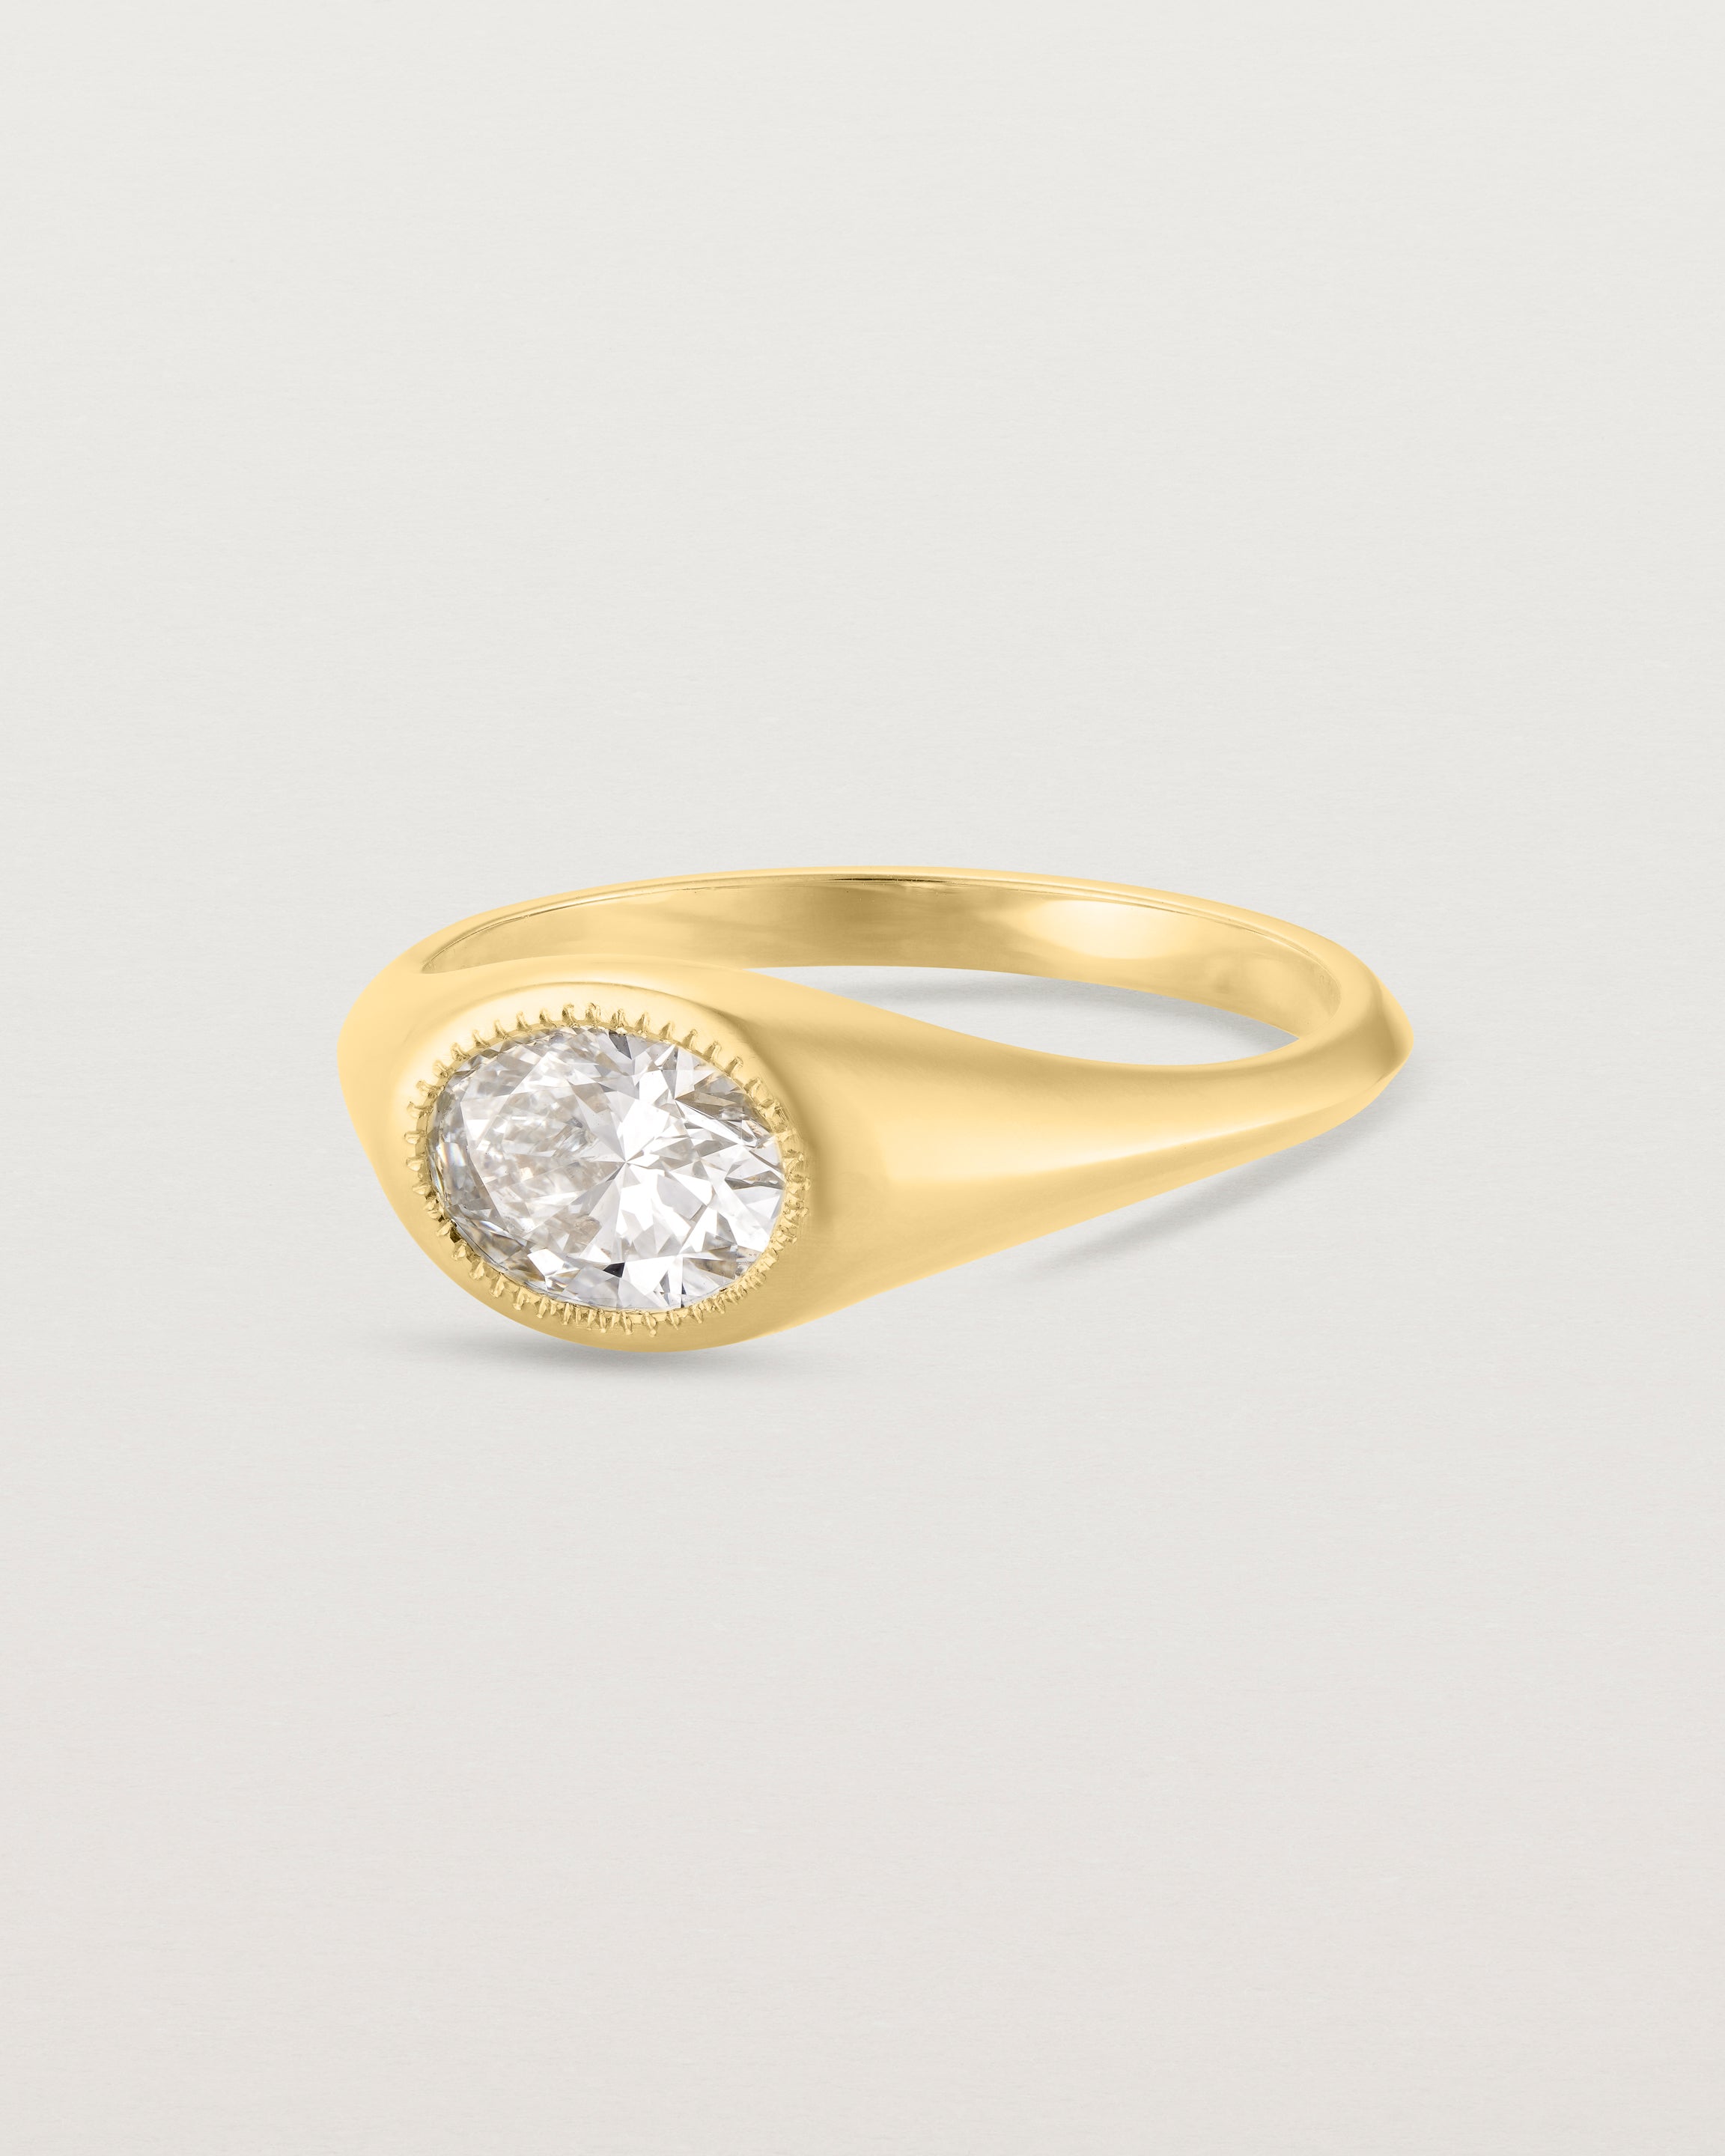 Angled view of the Átlas Oval Signet | Laboratory Grown Diamond in yellow gold, with a polished finish. 